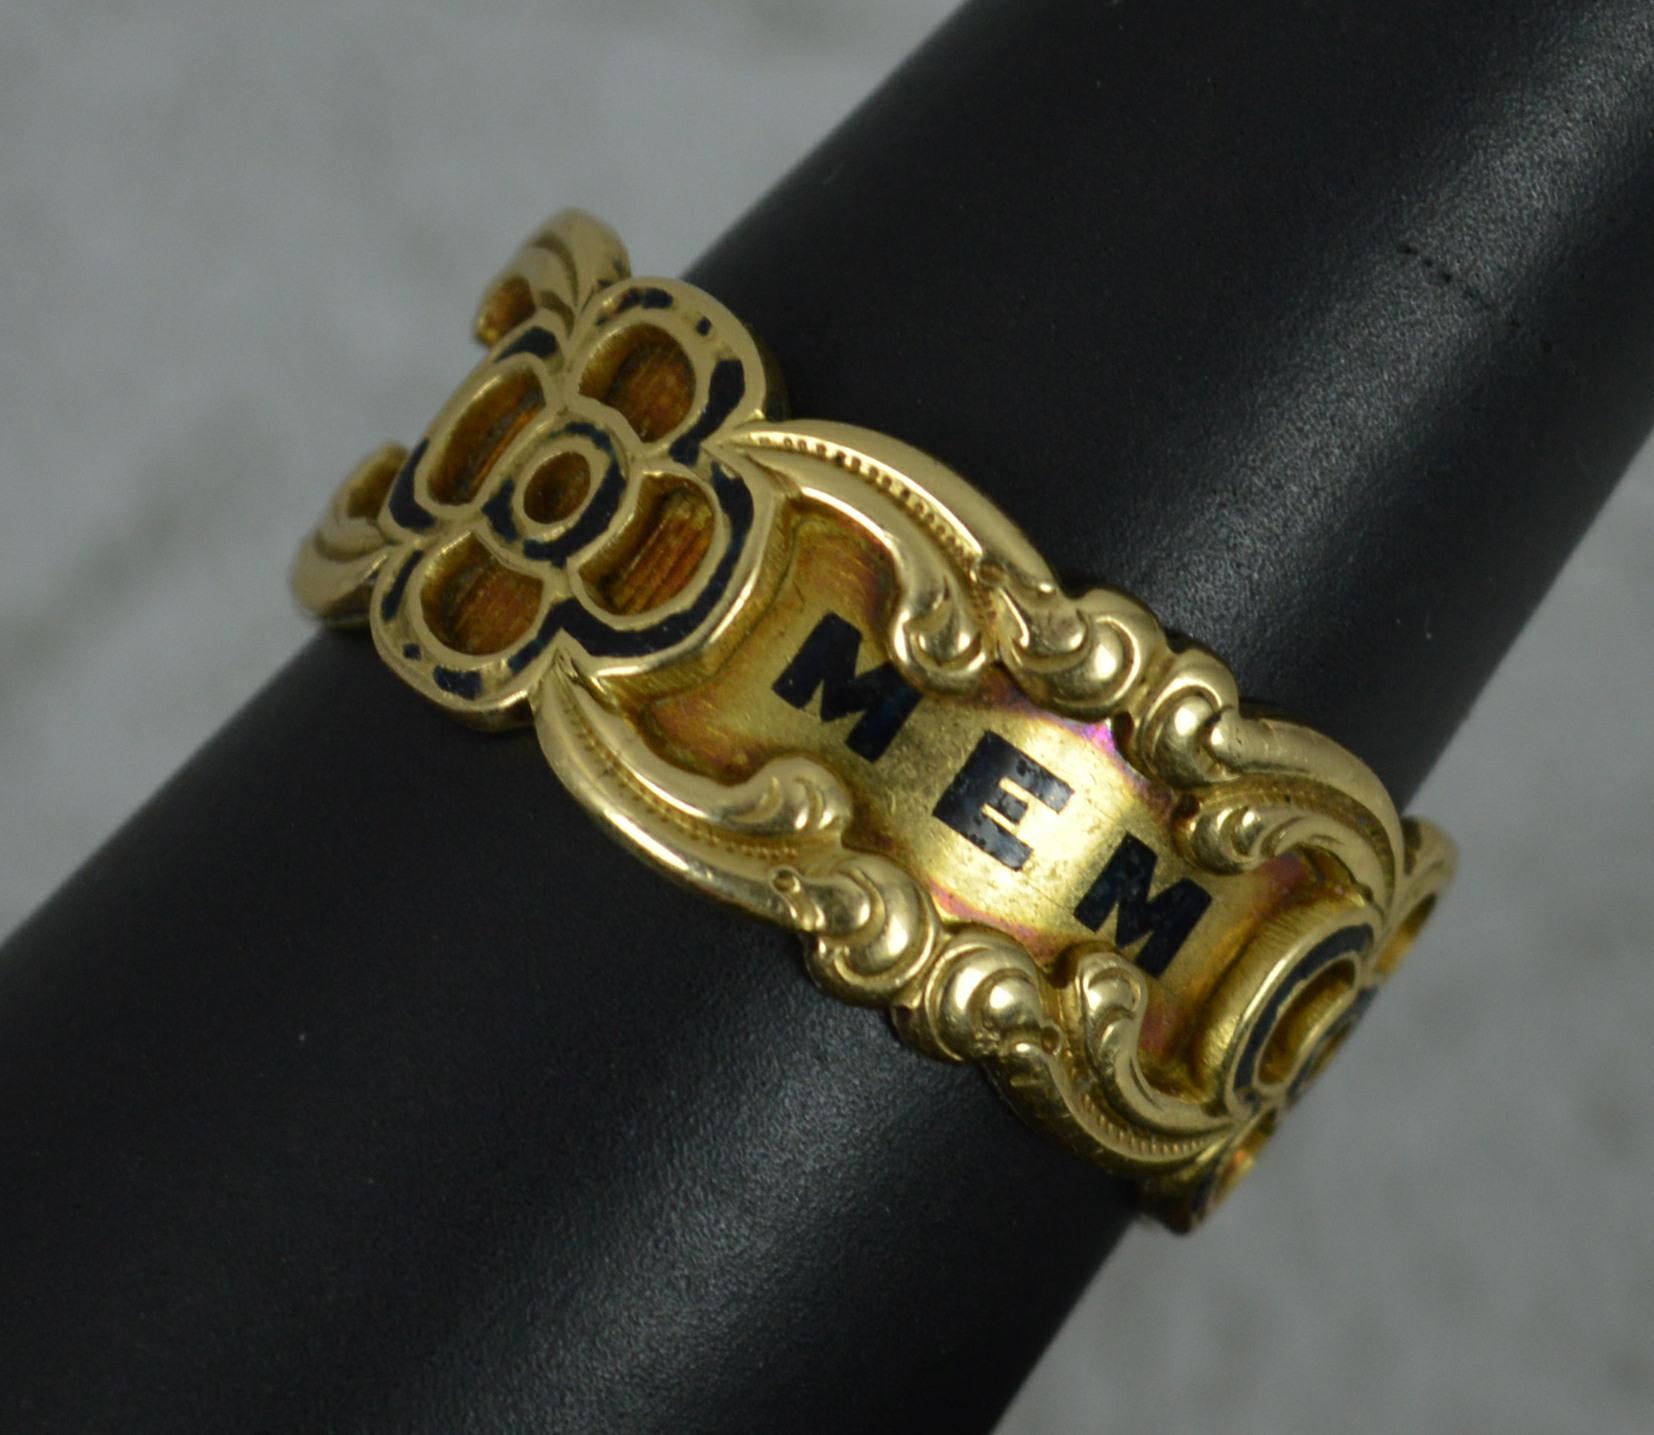 1842 Victorian 18 Carat Gold Enamel In Memory of Mourning Band Ring 7